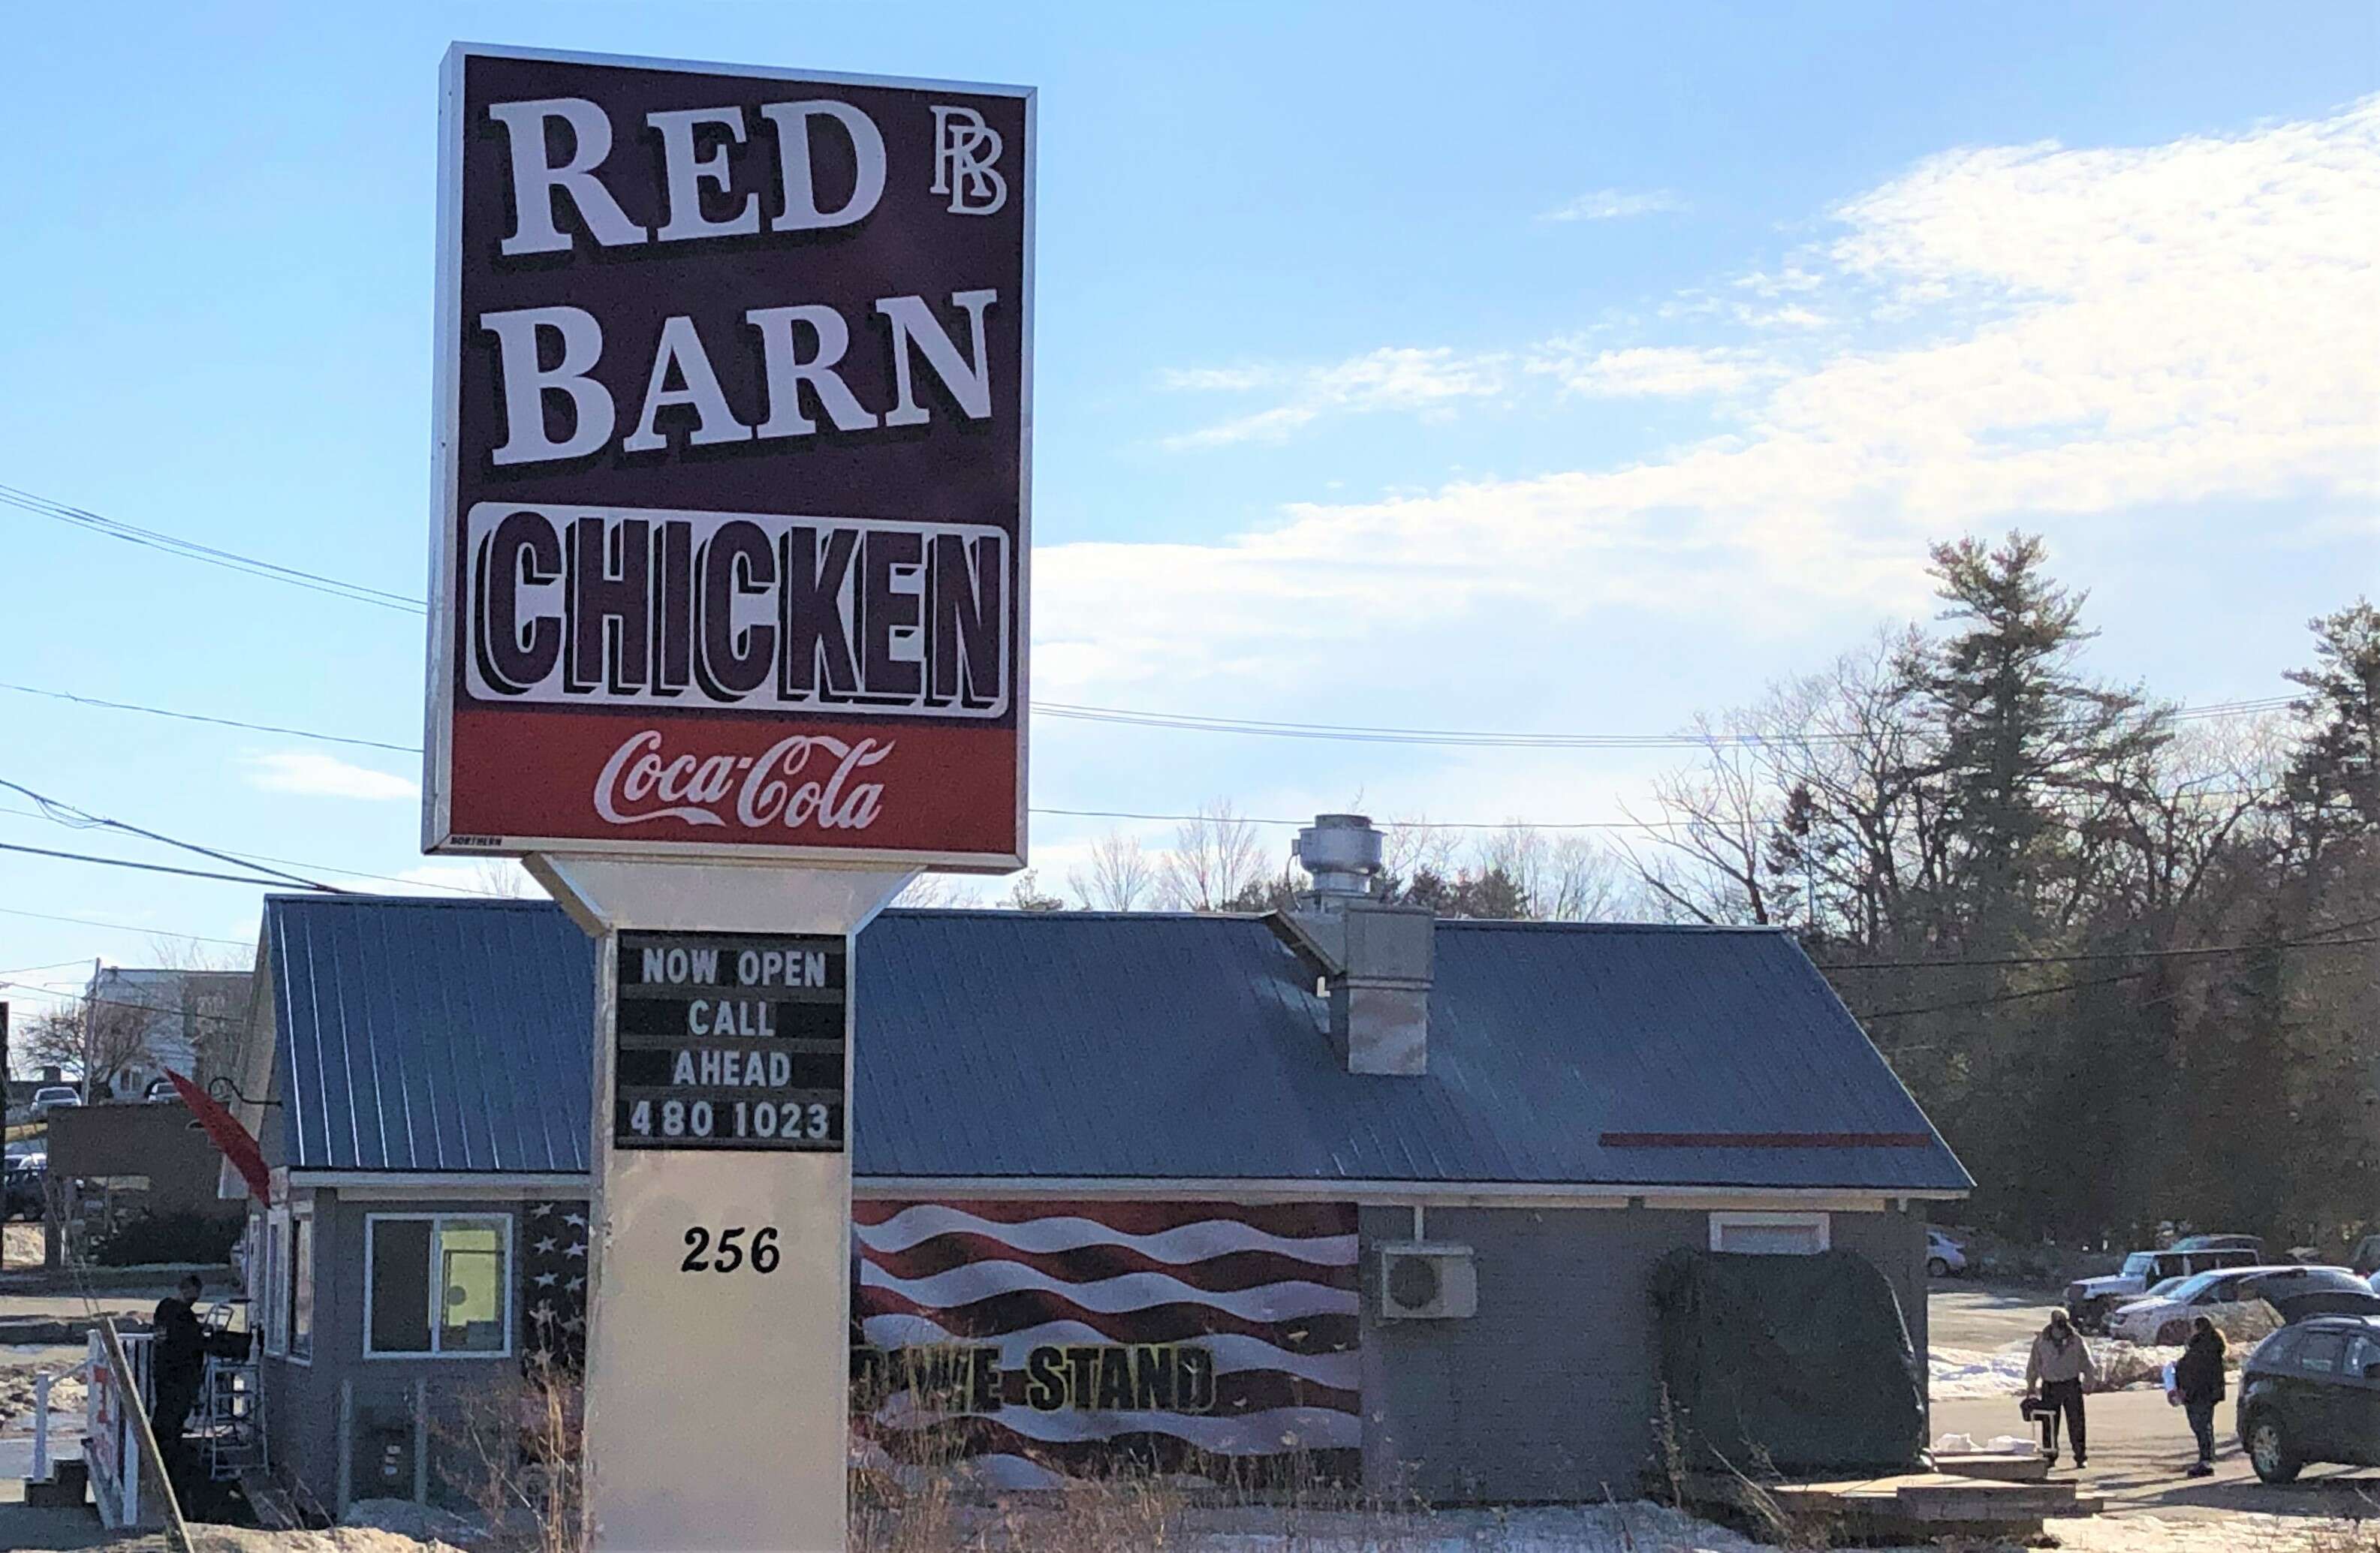 a small building with a big American flag mural on the side has a sign that says Red Barn Chicken takeout call ahead